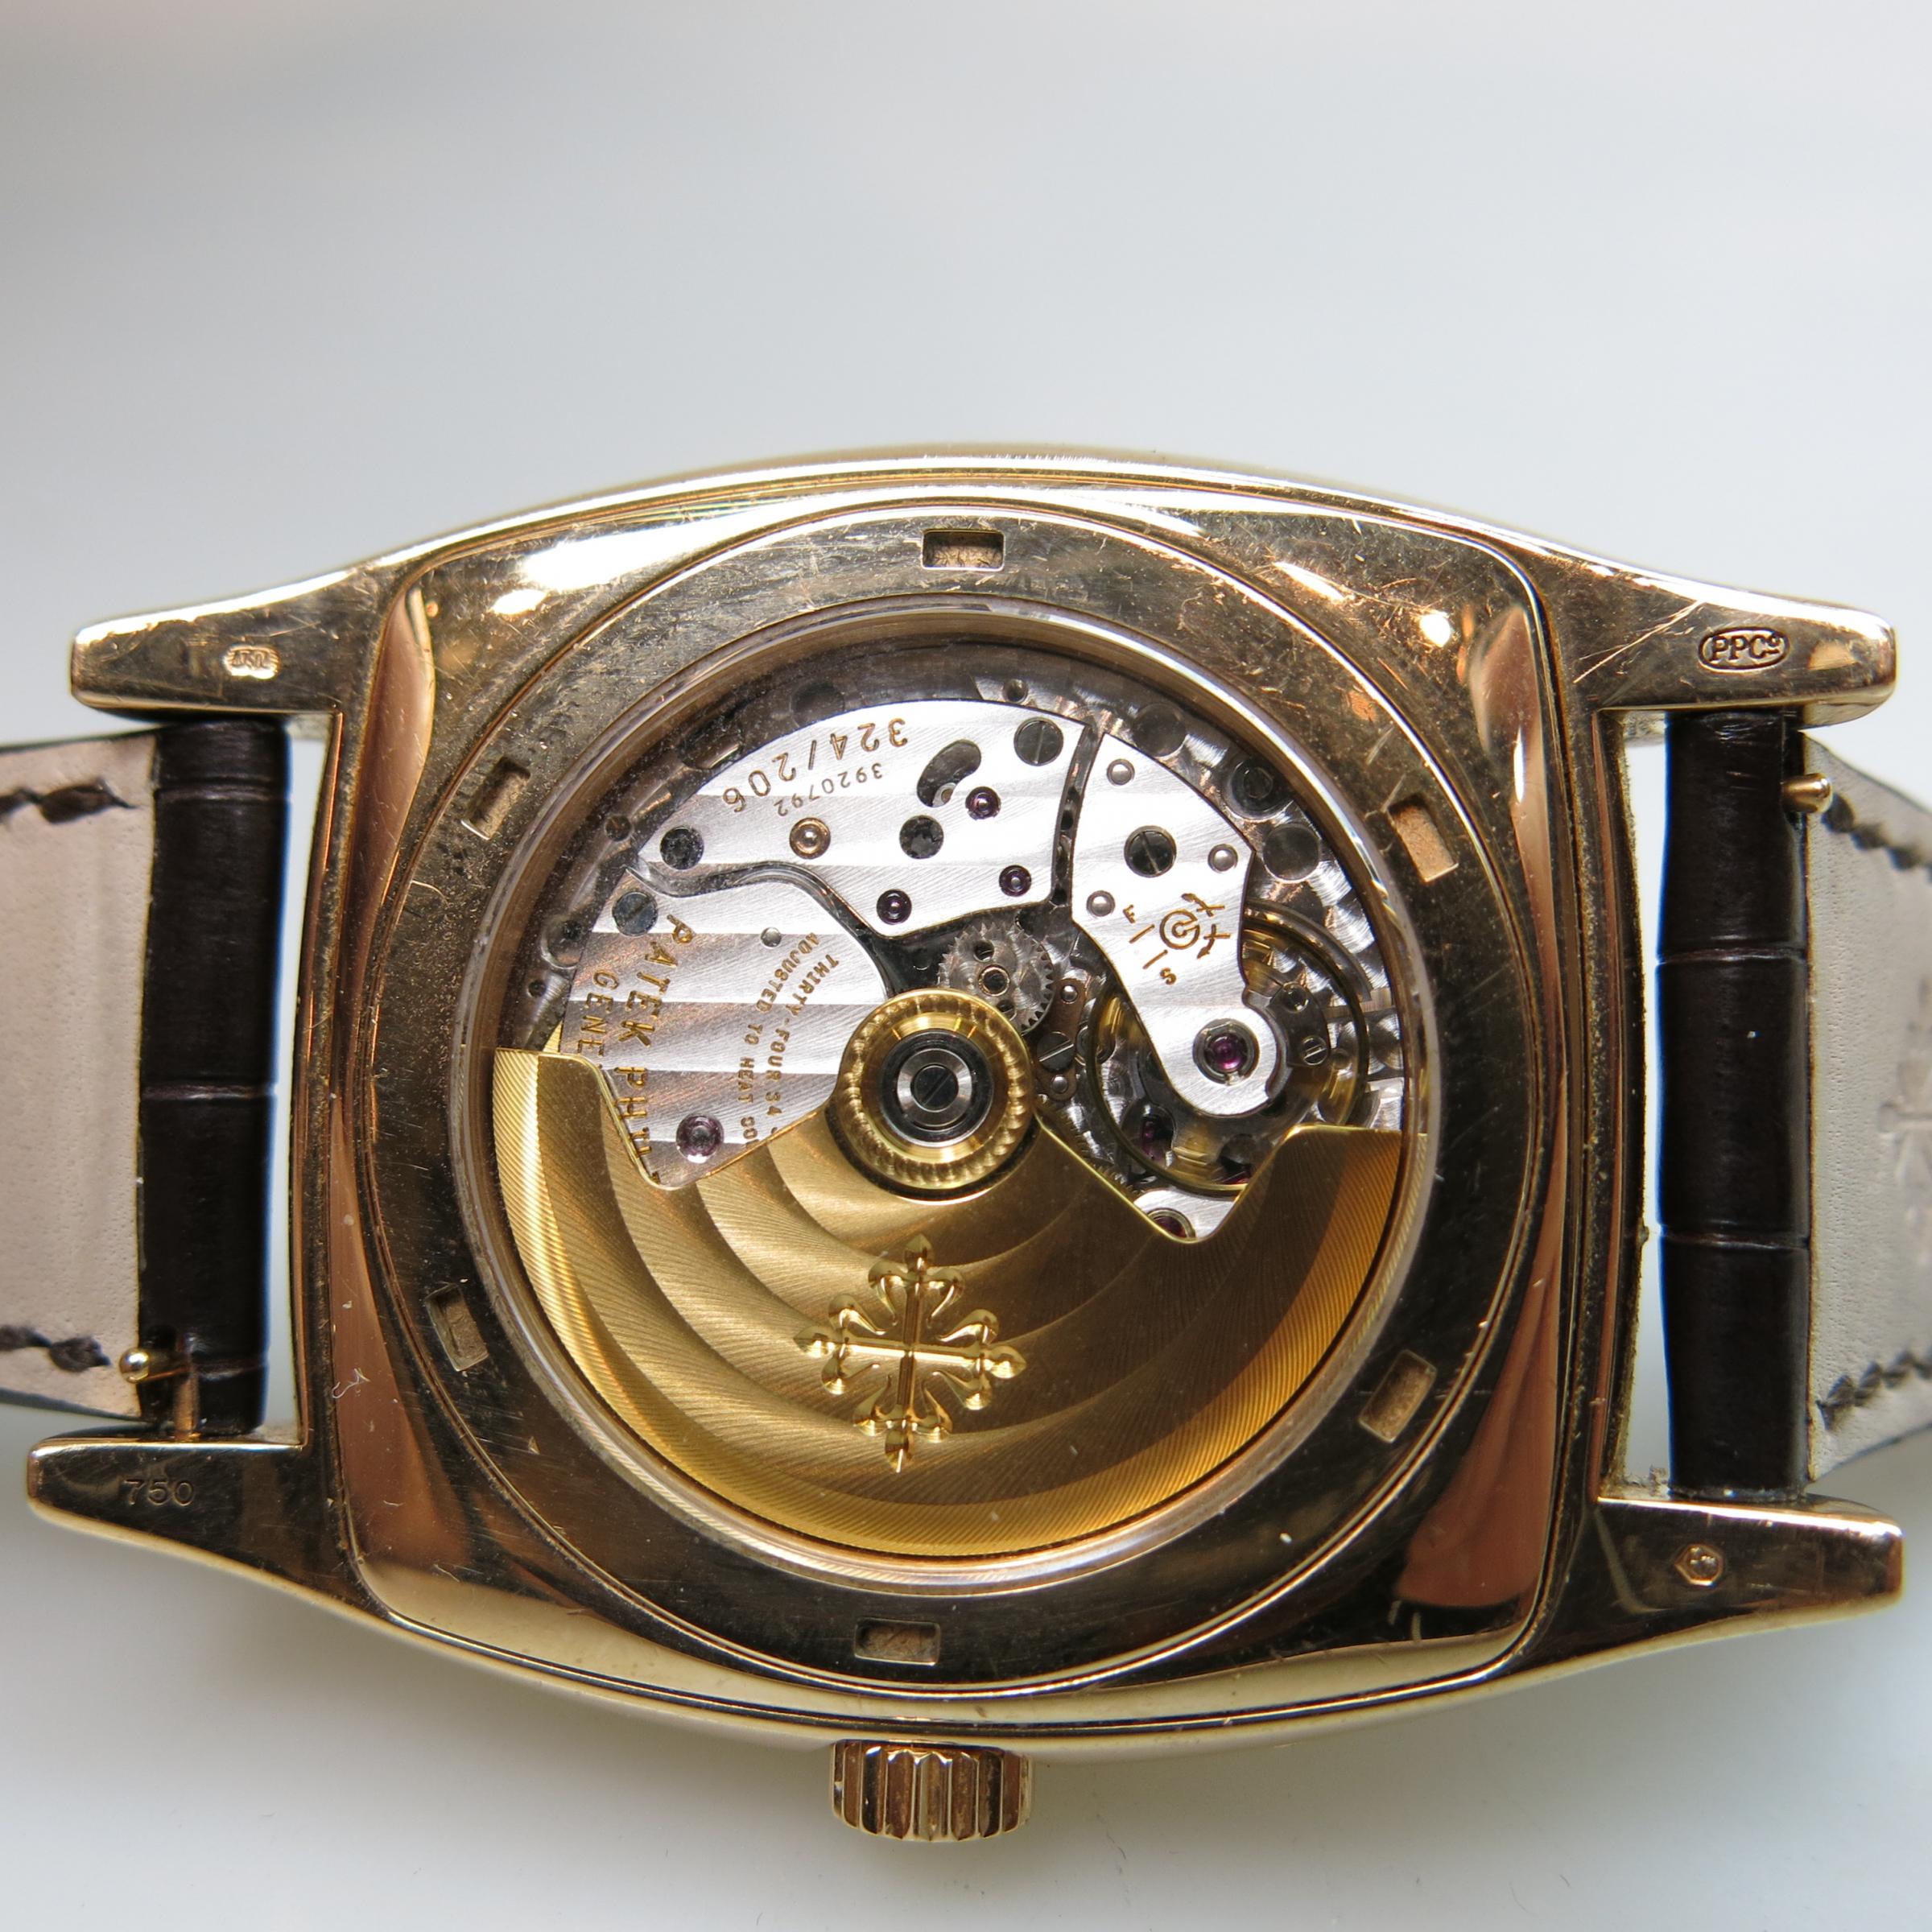 Patek Philippe 'Gondolo' Wristwatch With Triple Date And Moon Phase